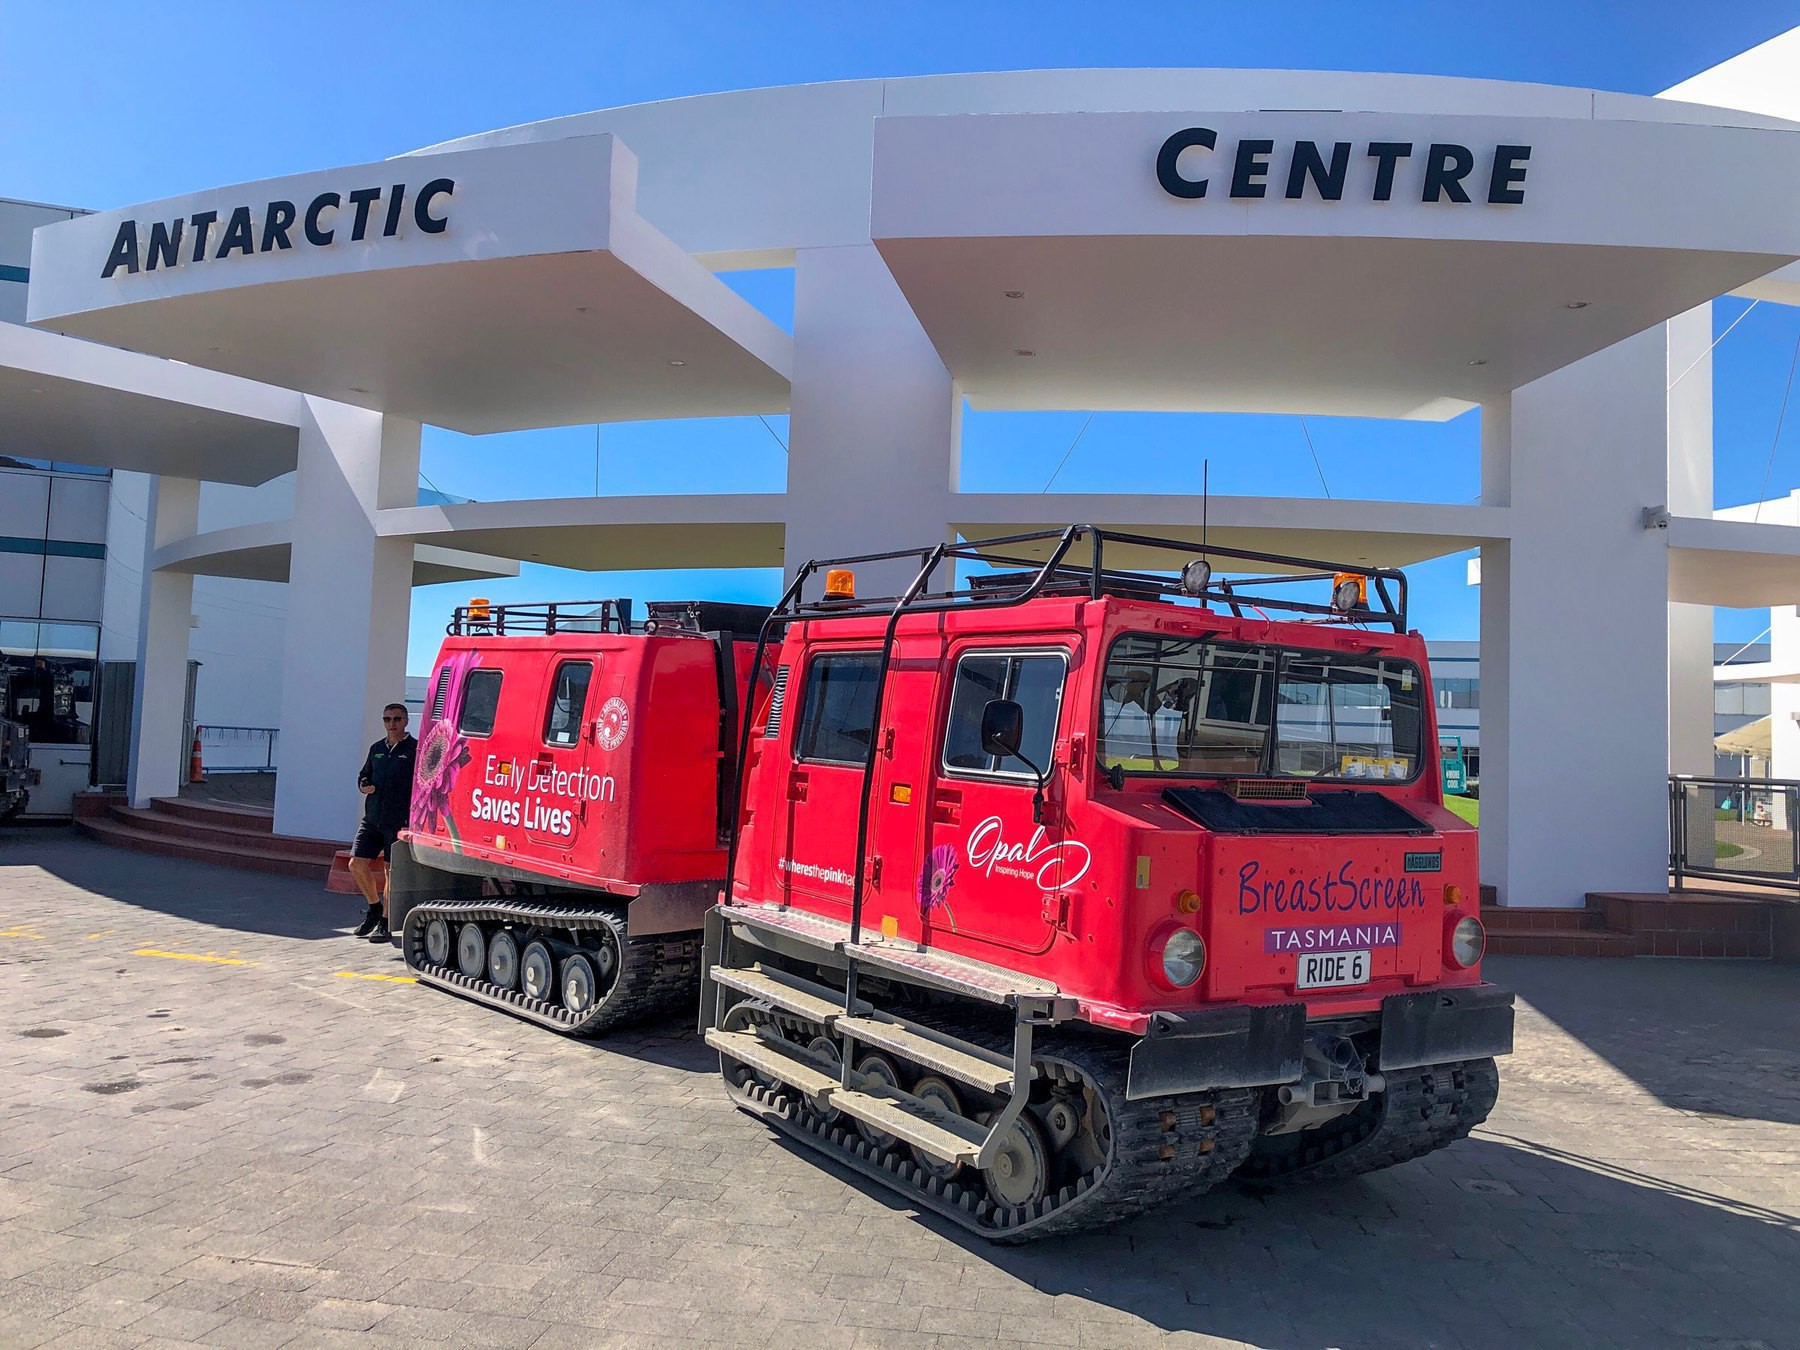 hagglund snotrack vehicle at the Antarctic centre